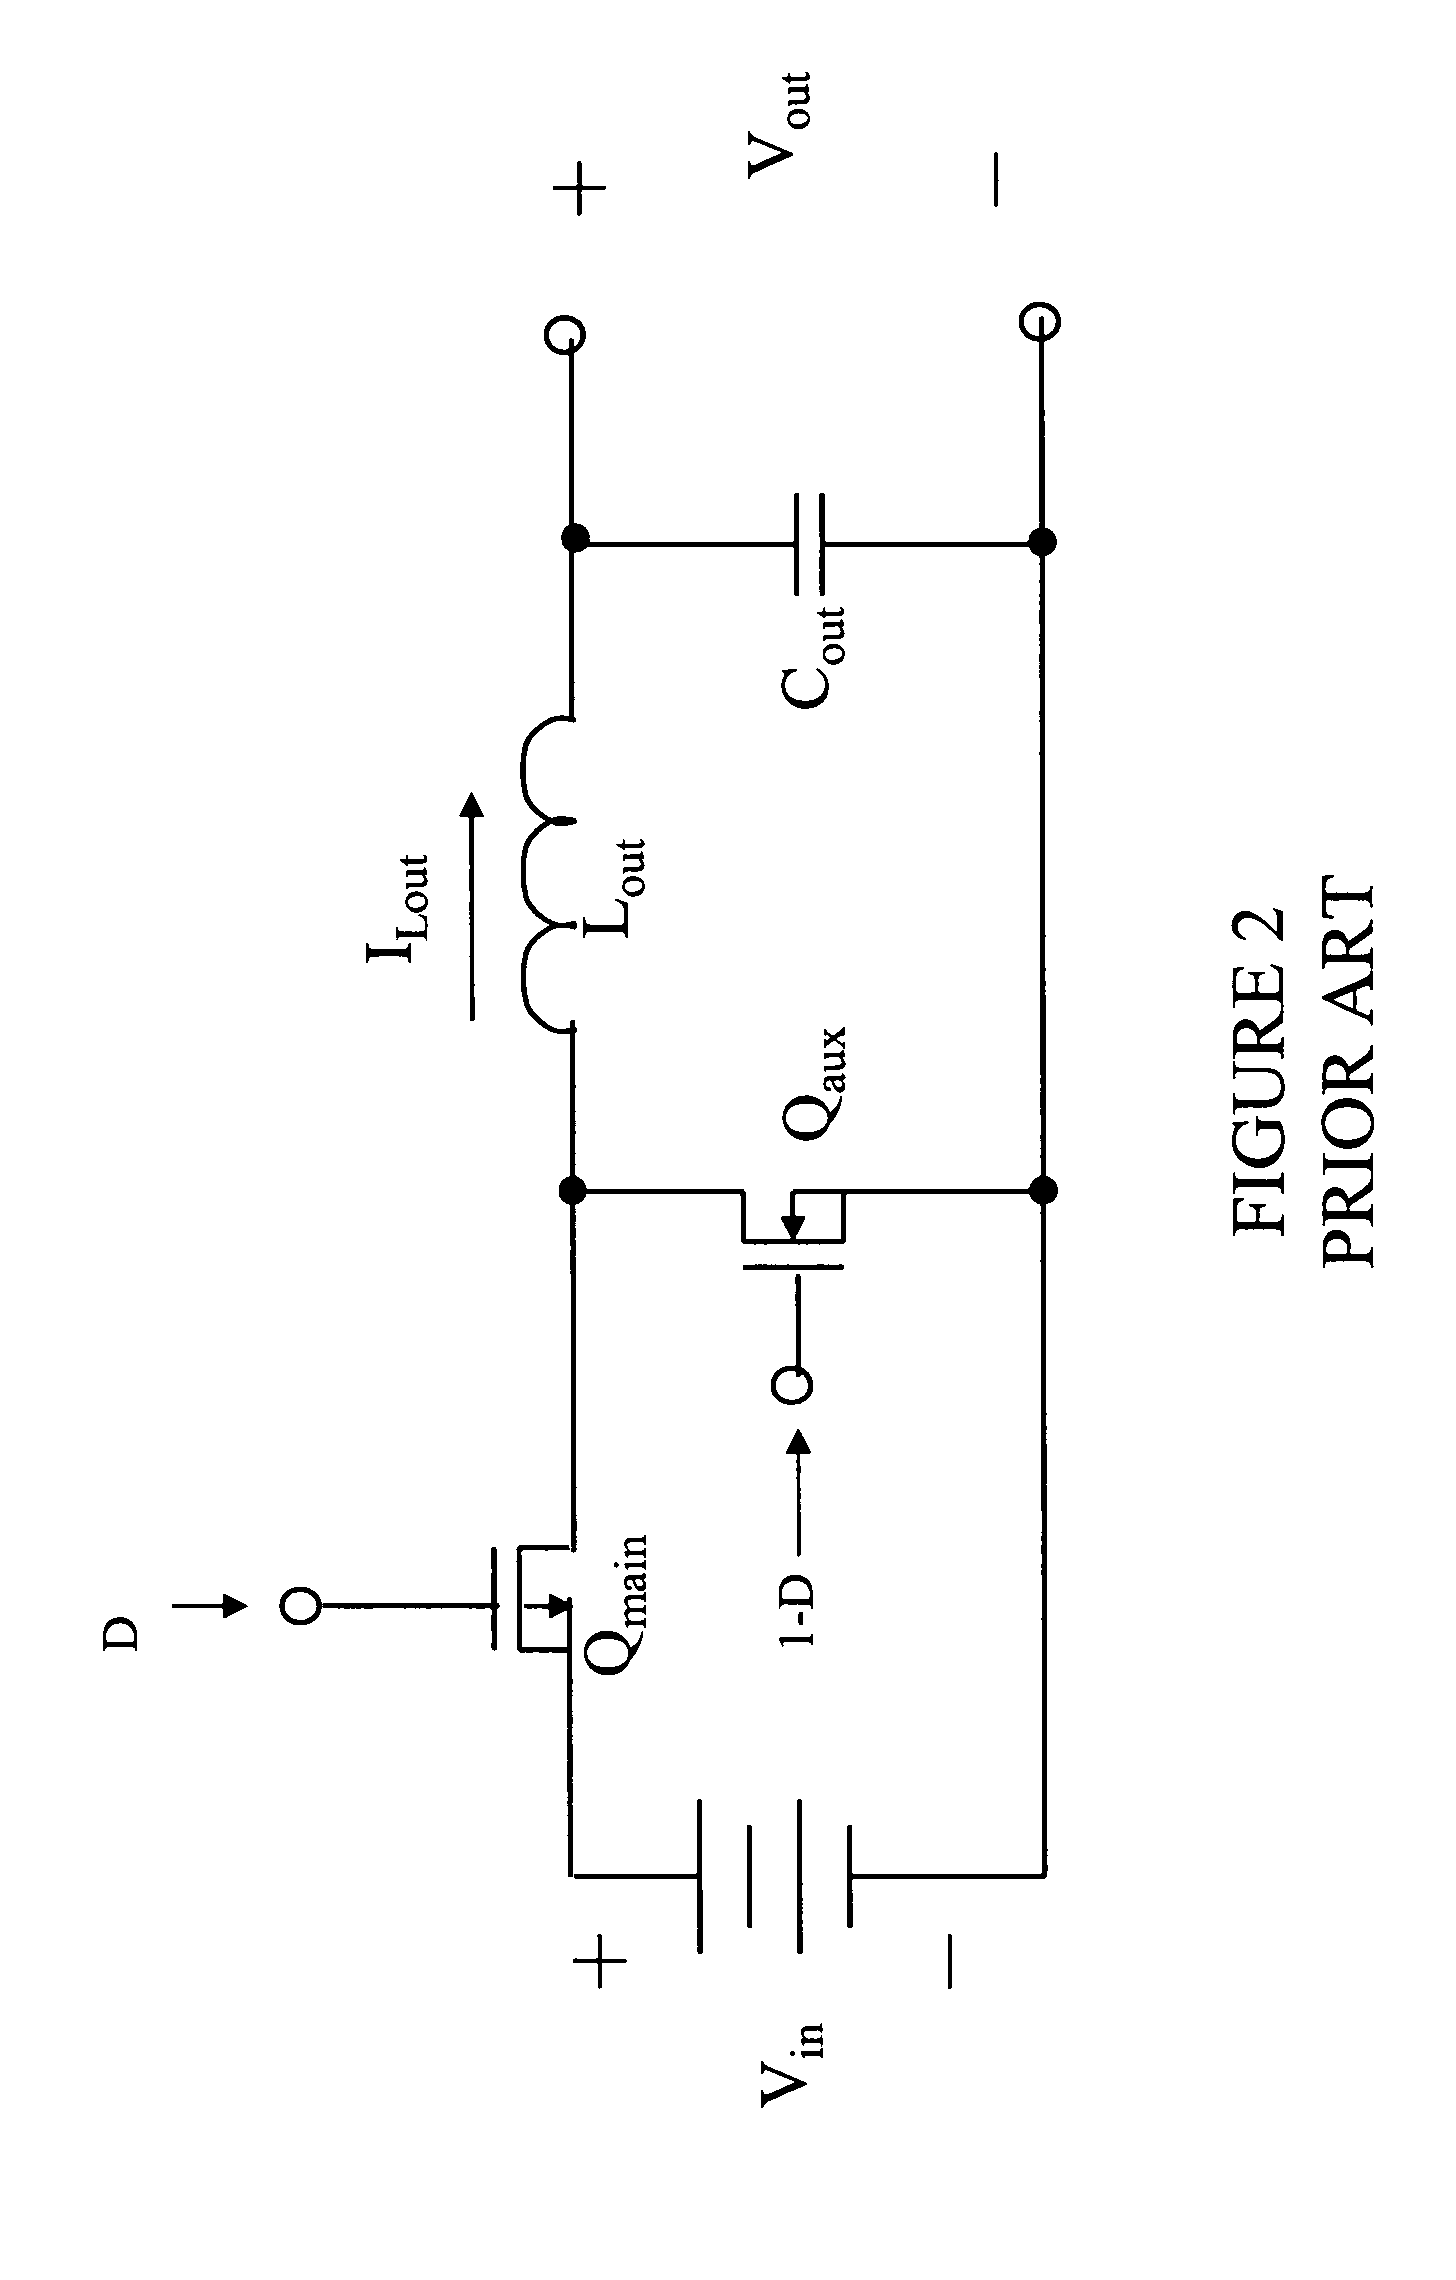 Power system with power converters having an adaptive controller